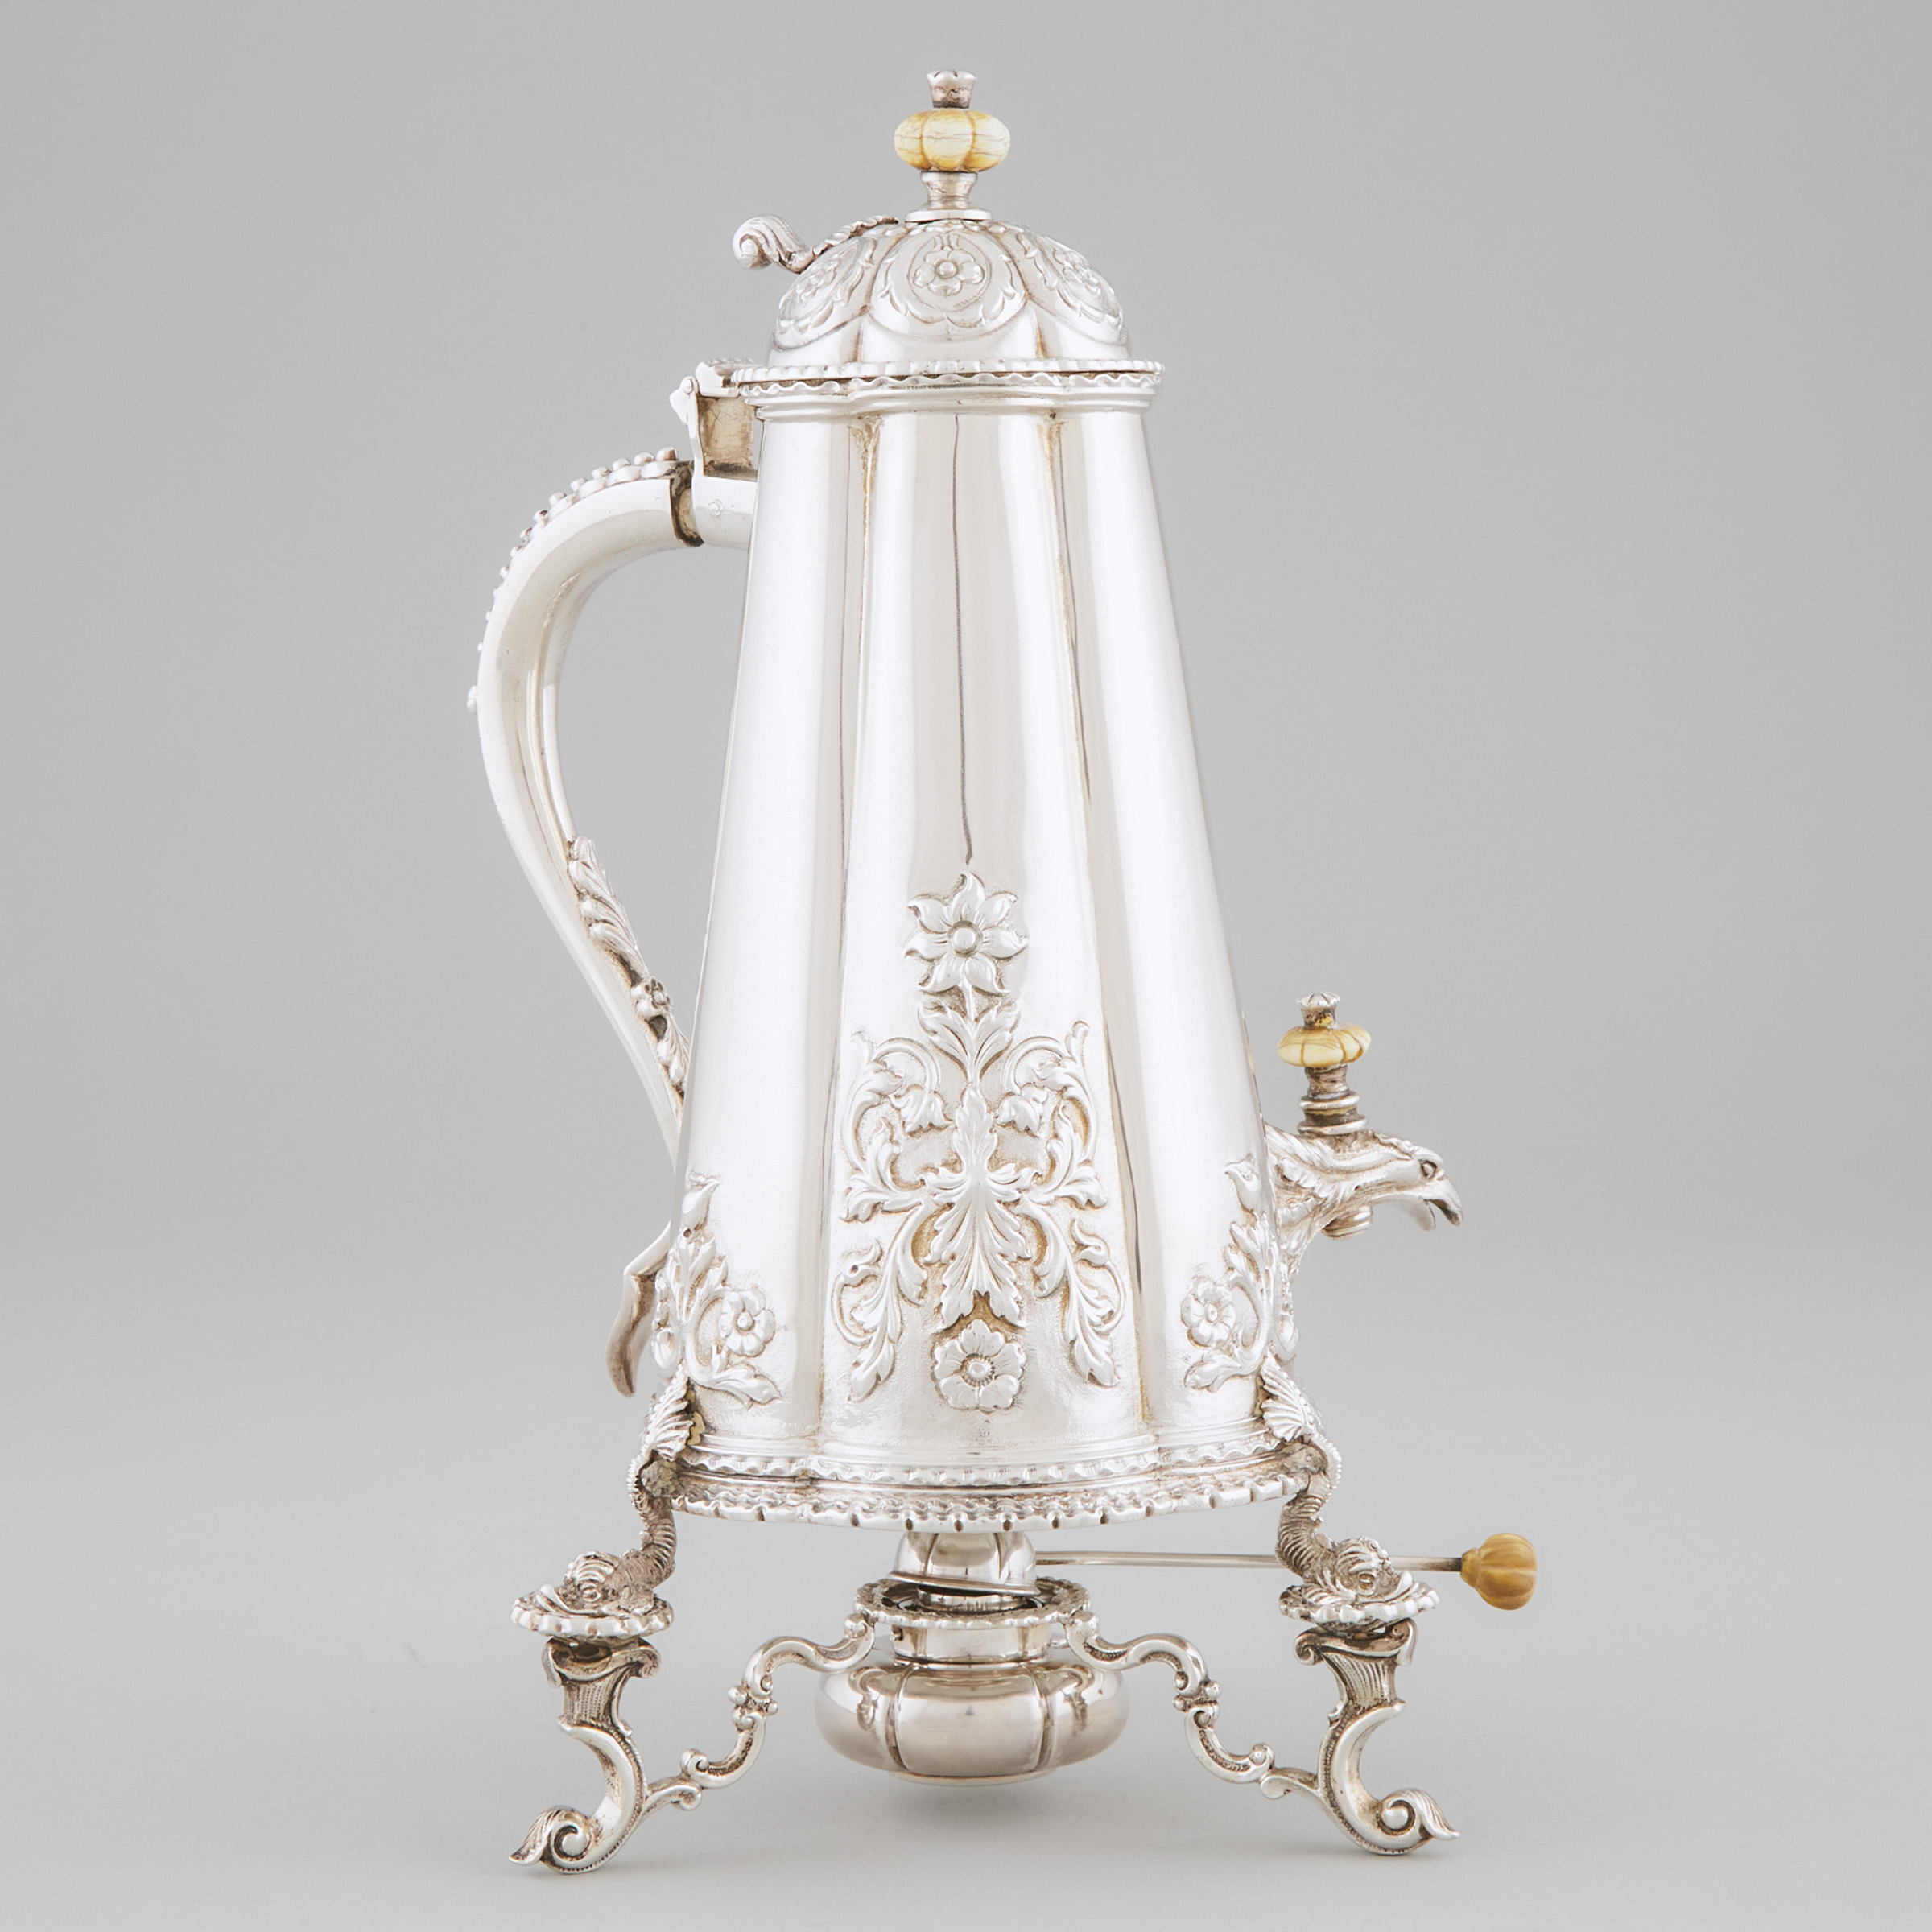 Portuguese Silver Tea Urn on Lampstand, Lisbon, early 20th century